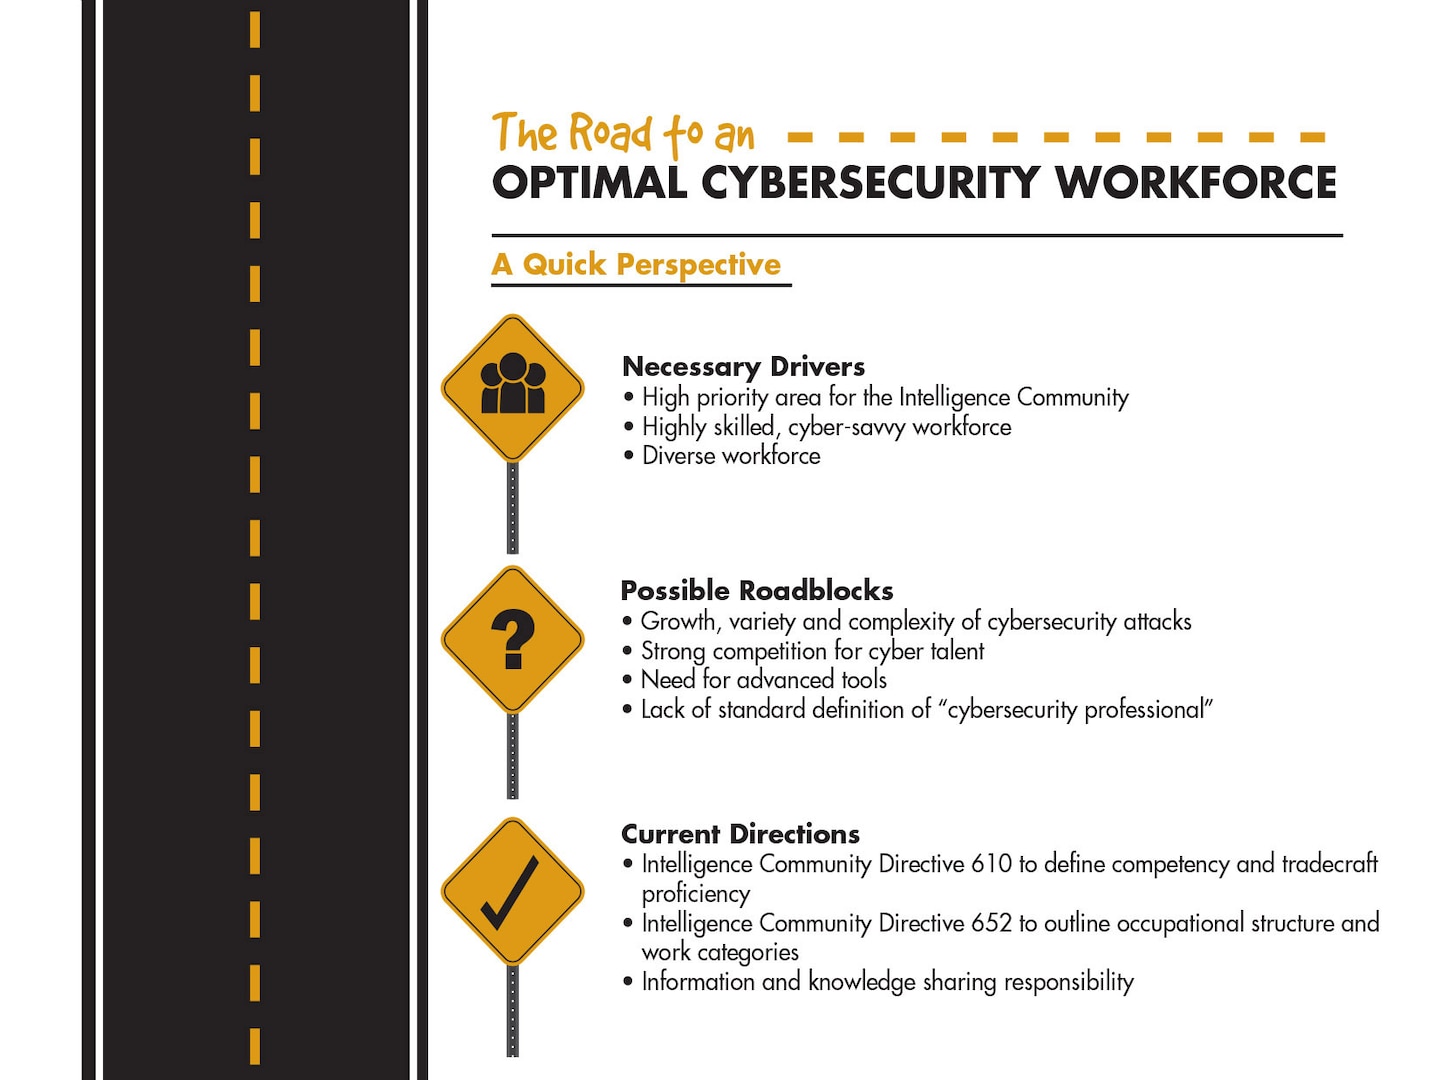 The Road to an Optimal Cybersecurity Workforce Infographic